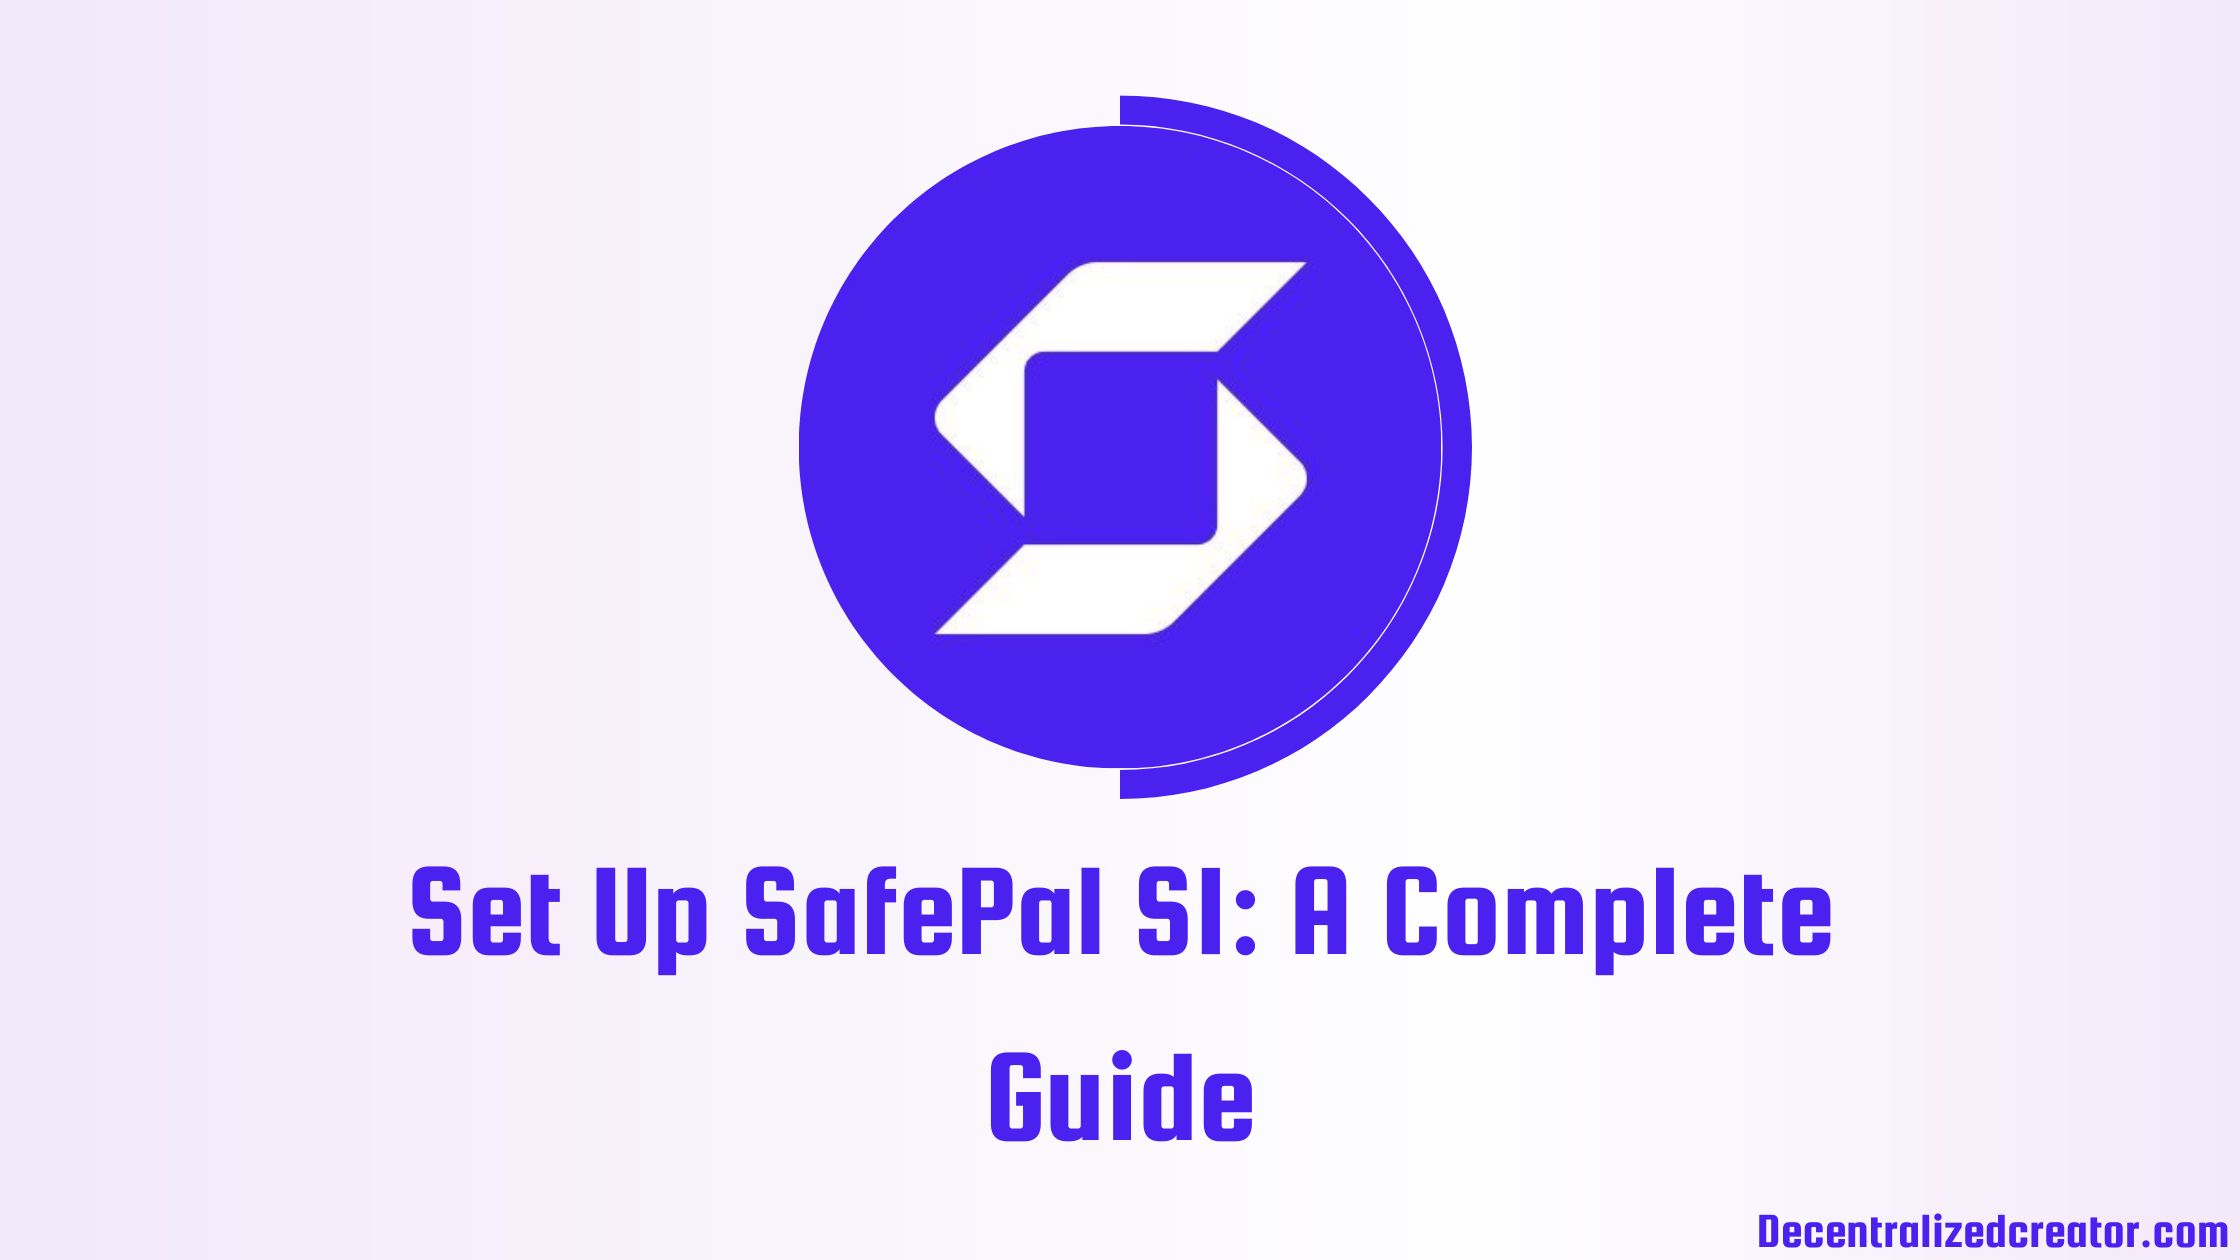 Set Up SafePal S1: A Complete Guide